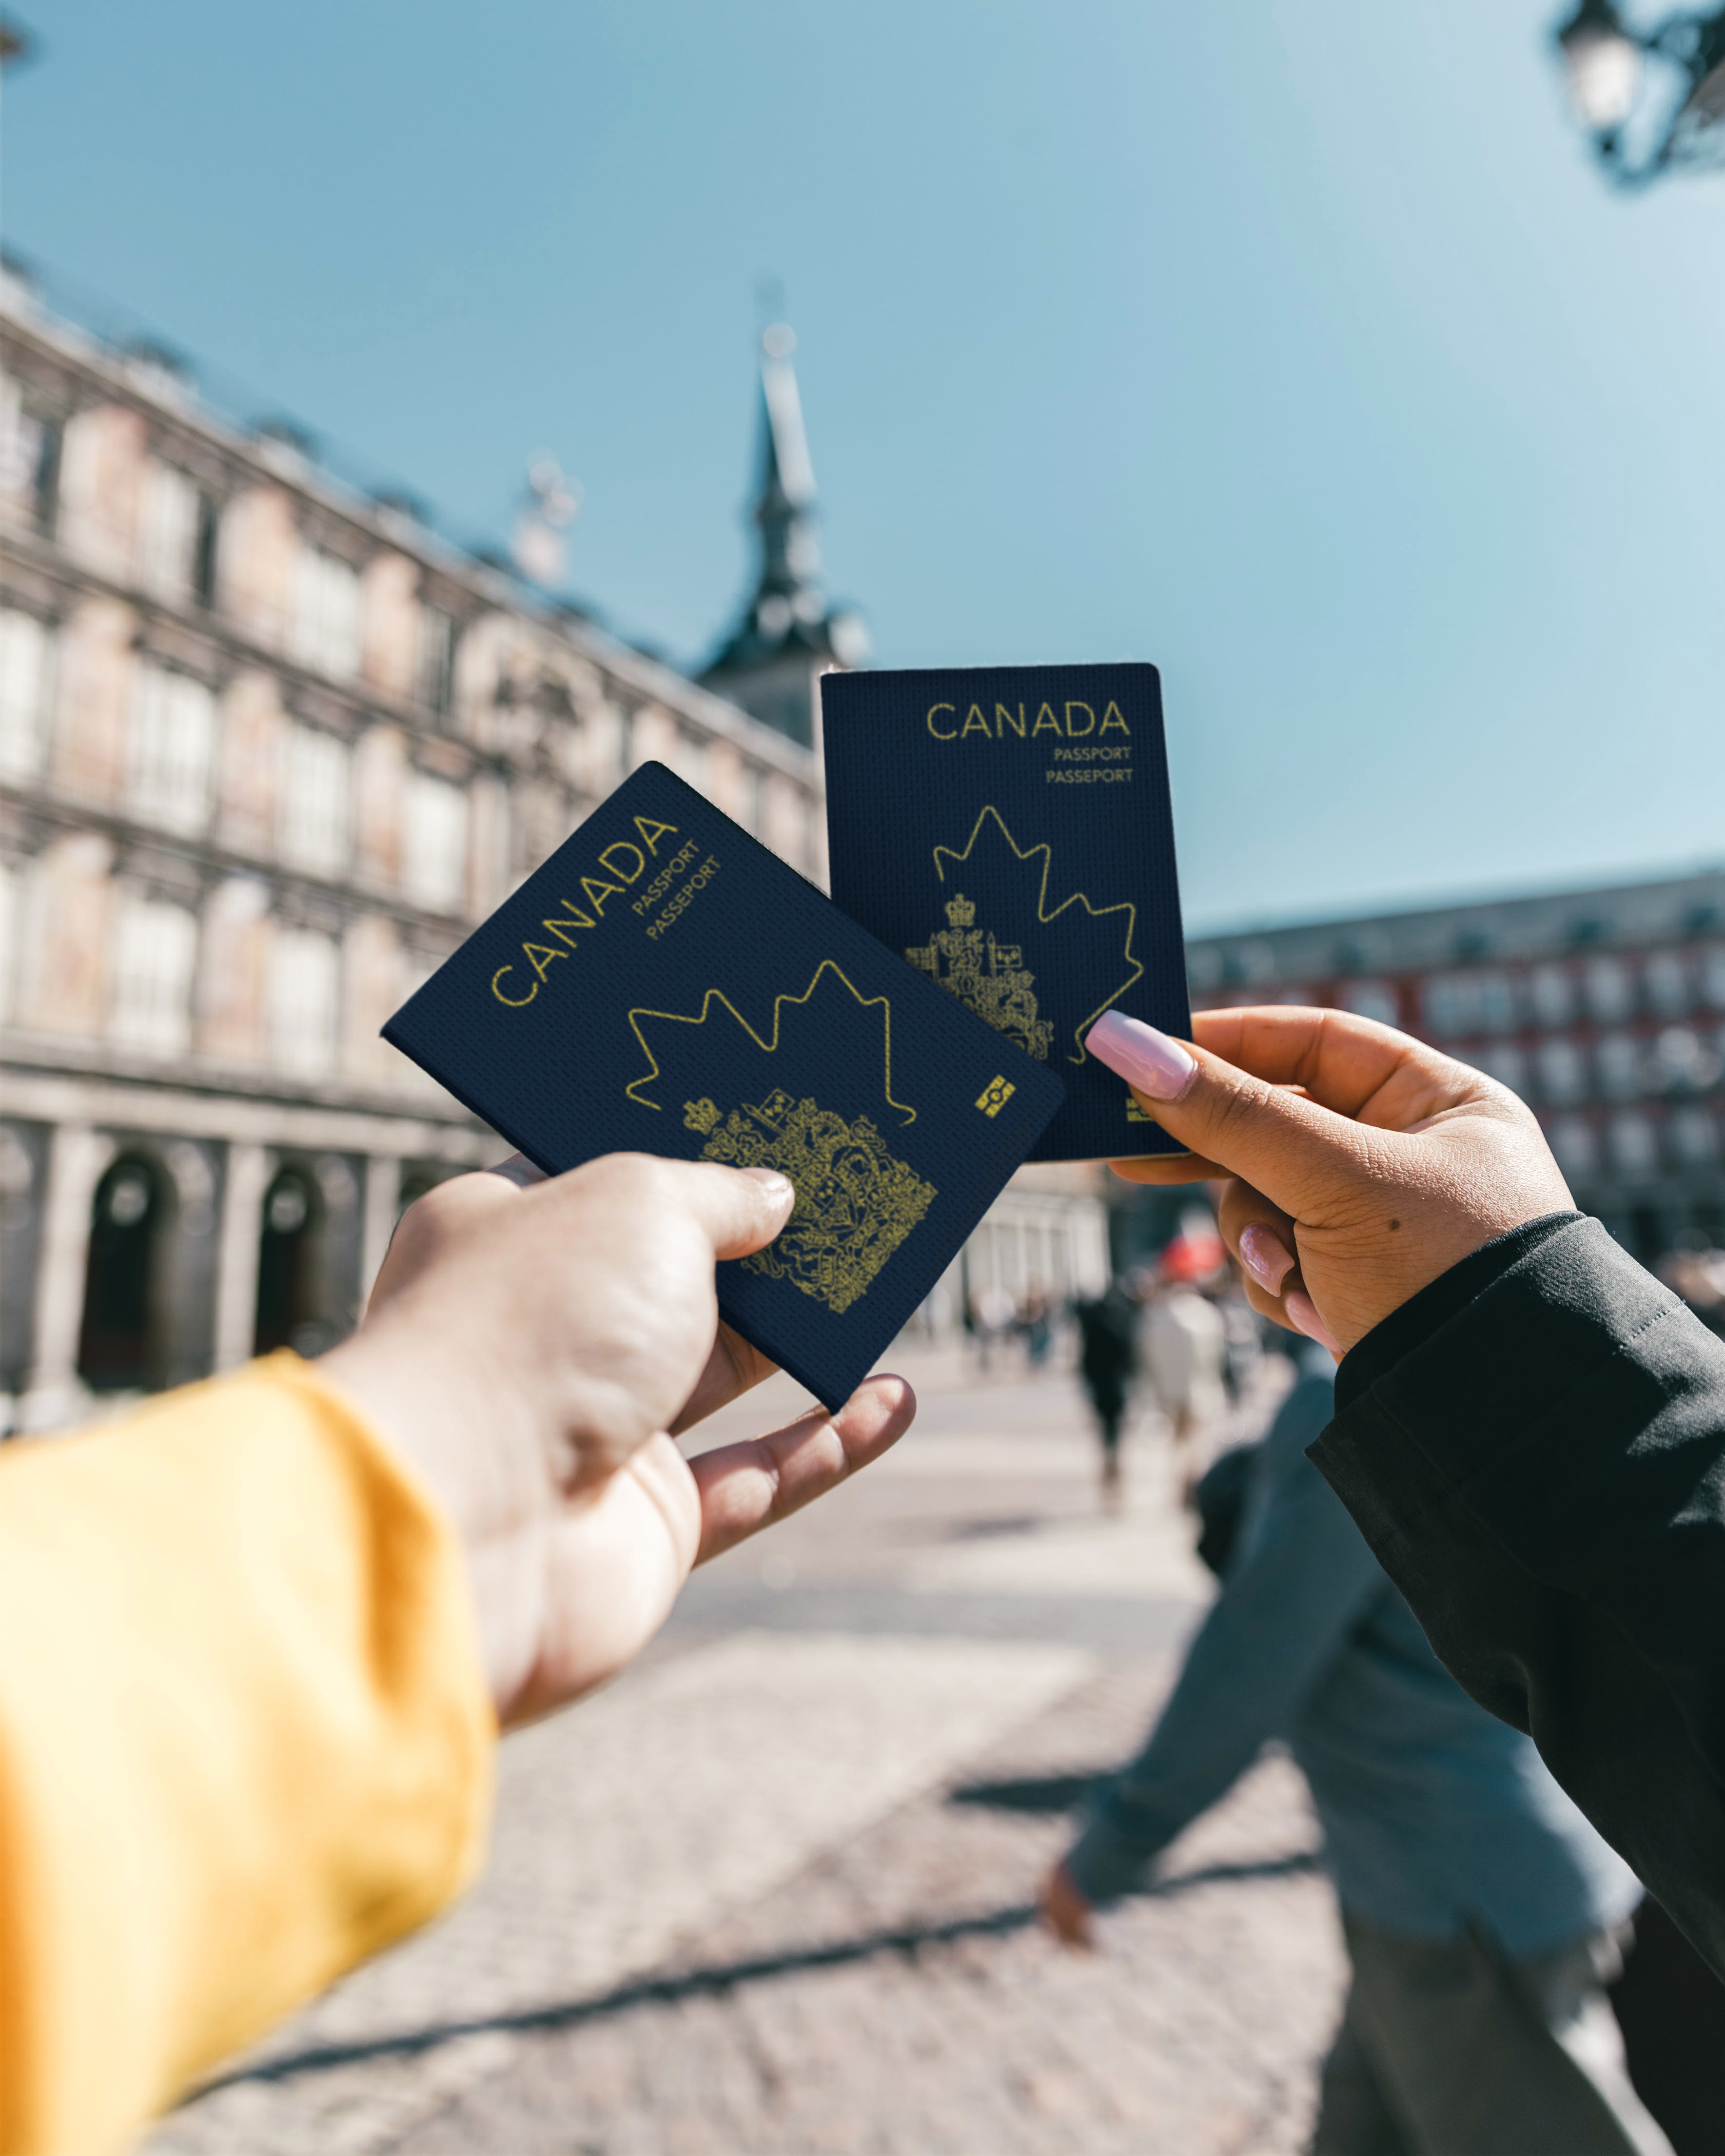 Two peoples hands holding up their passports infront of an out of focus building